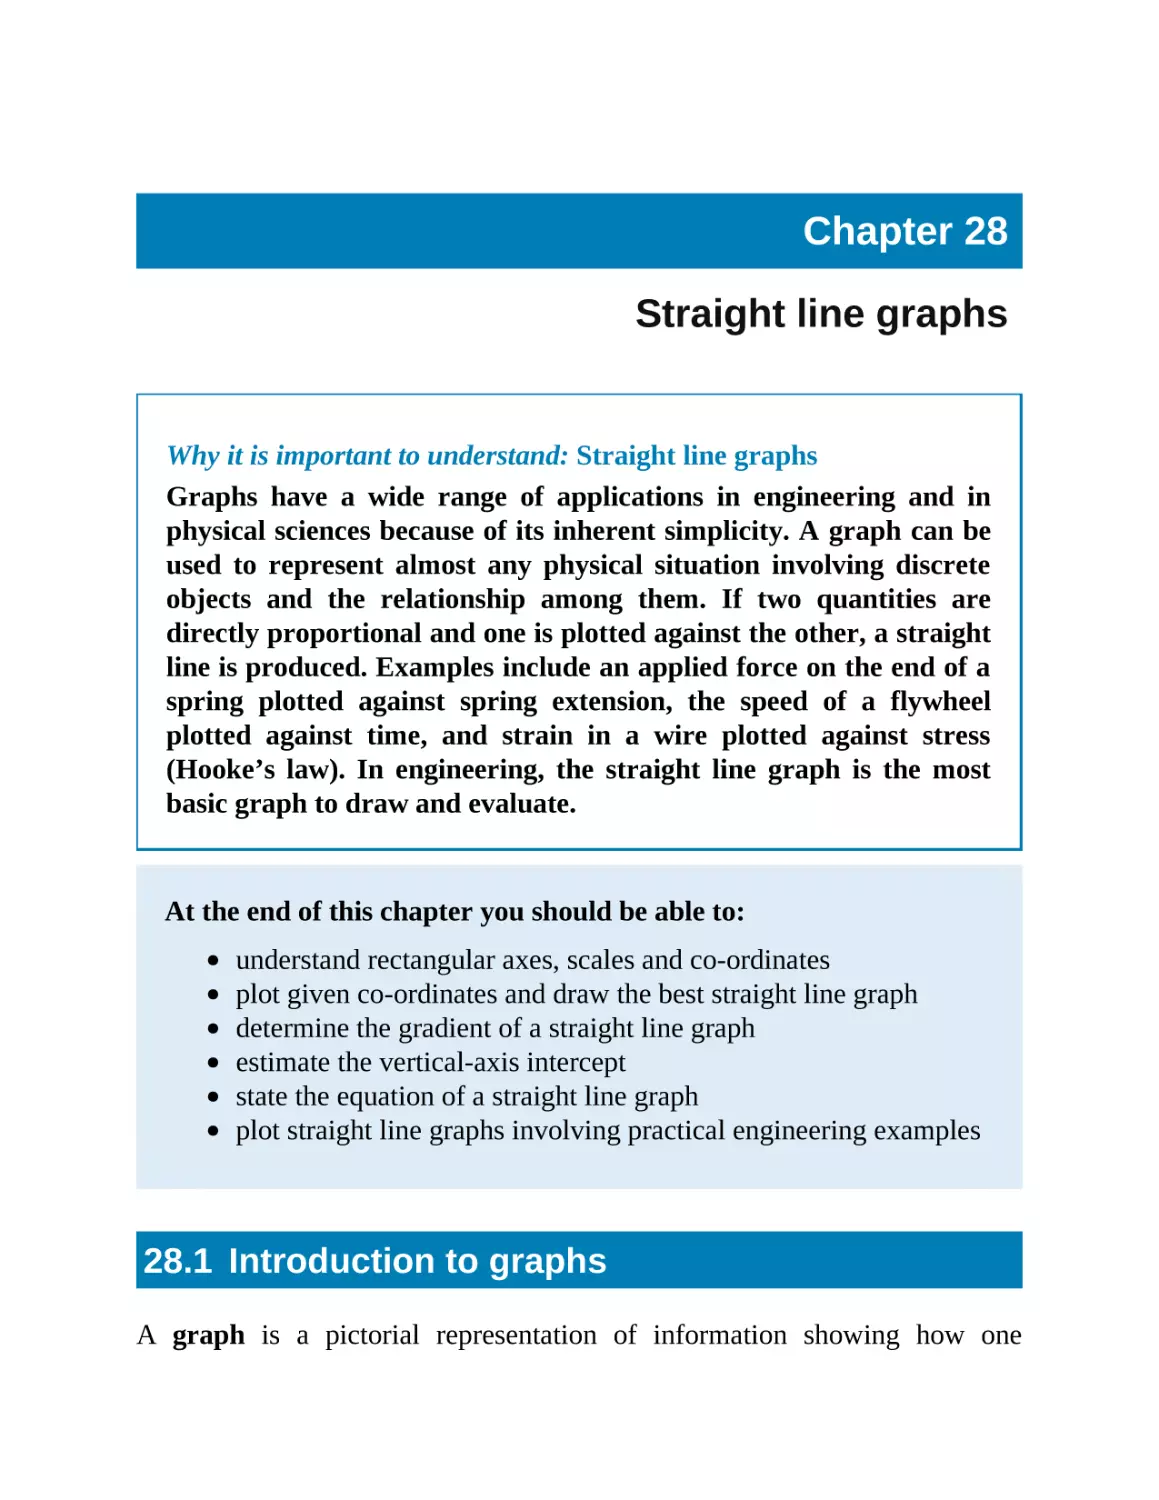 28 Straight line graphs
28.1 Introduction to graphs